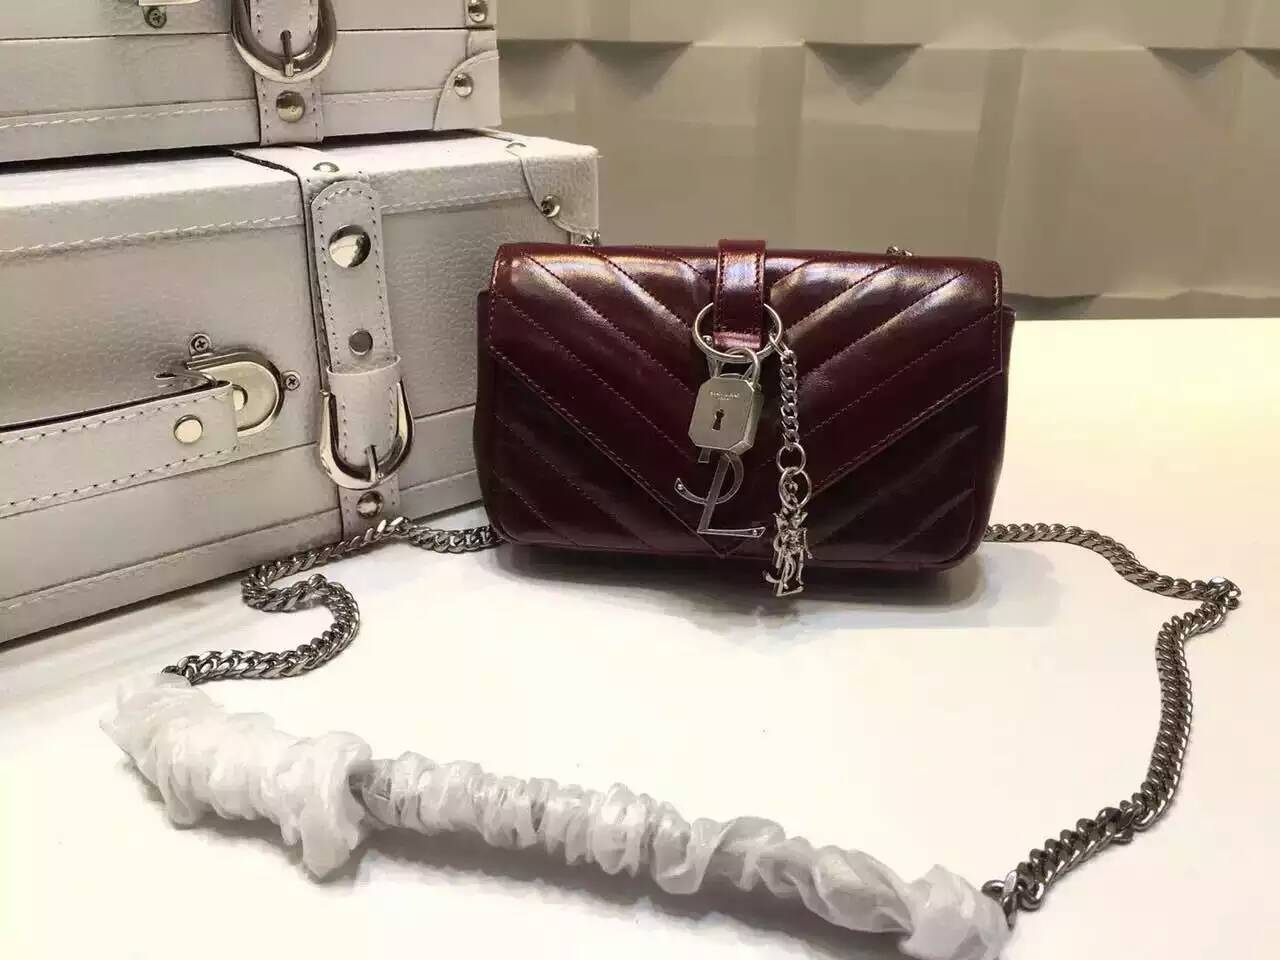 S/S 2016 Saint Laurent Bags Cheap Sale-Saint Laurent Classic Baby Monogram Chain Bag in Burgundy Shiny Matelasse Leather with Silver 